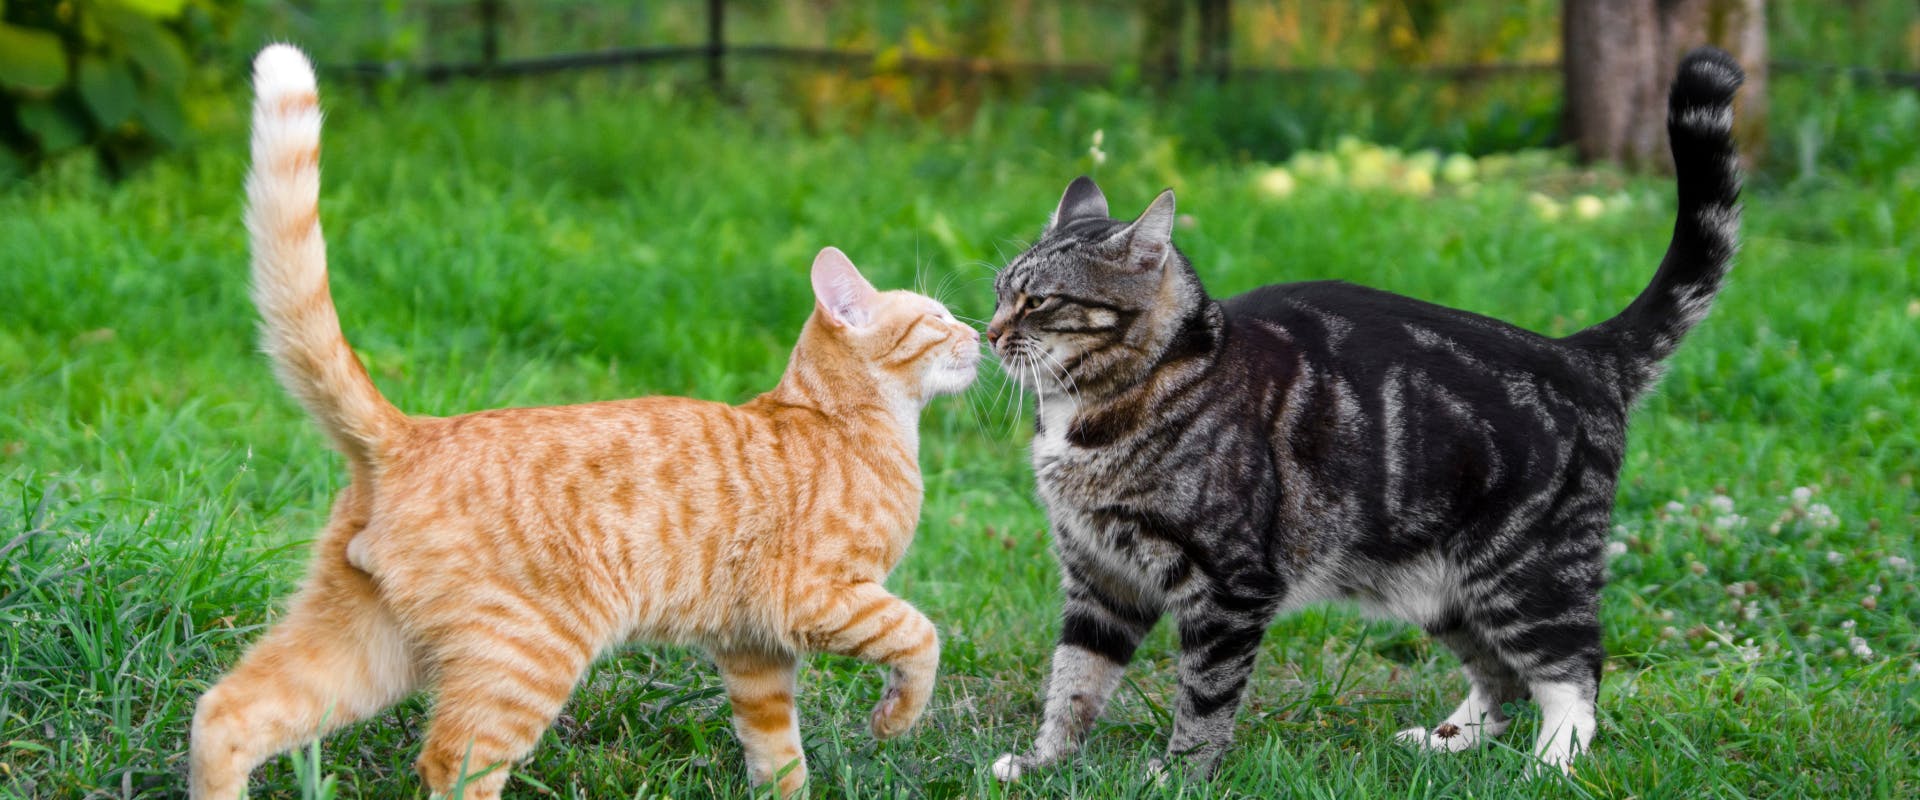 a ginger tabby and tabby cat greeting each other by touching noses in a field of grass